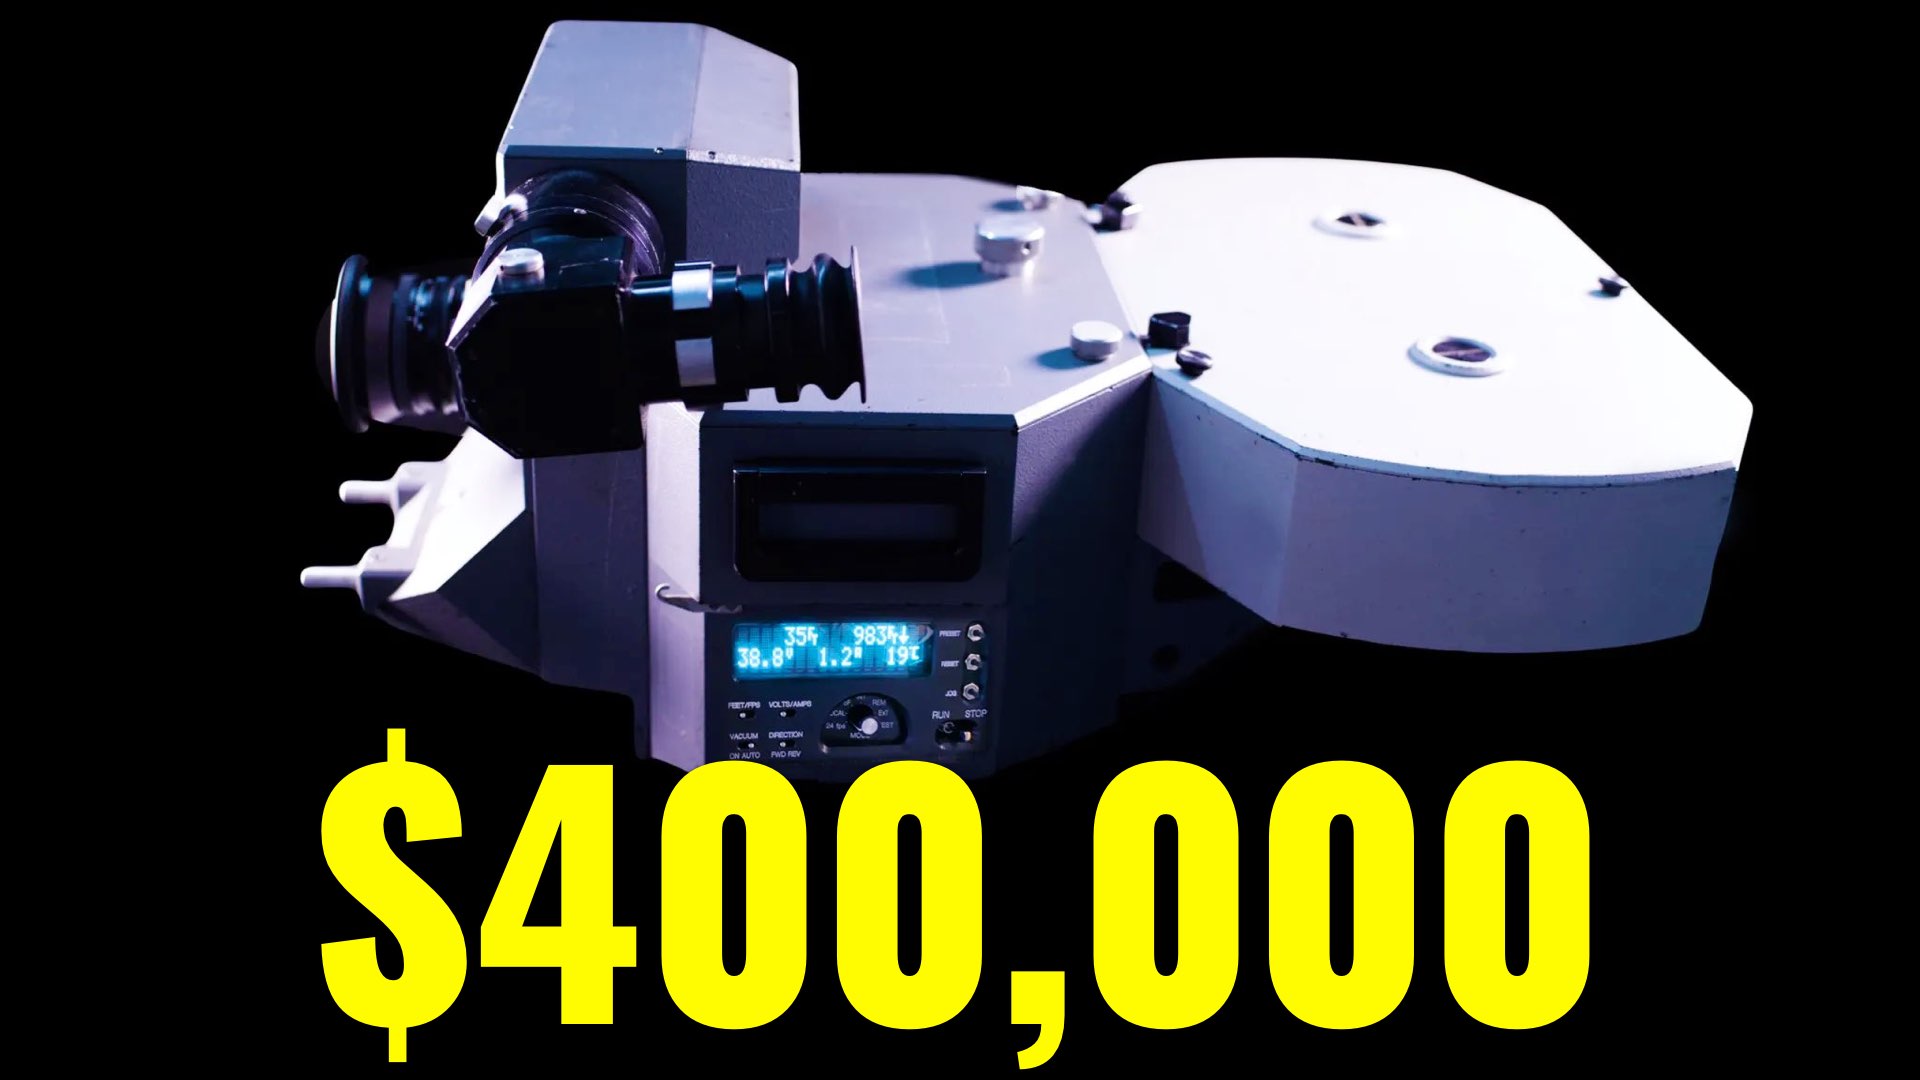 Buy An IMAX Film Camera for $400,000